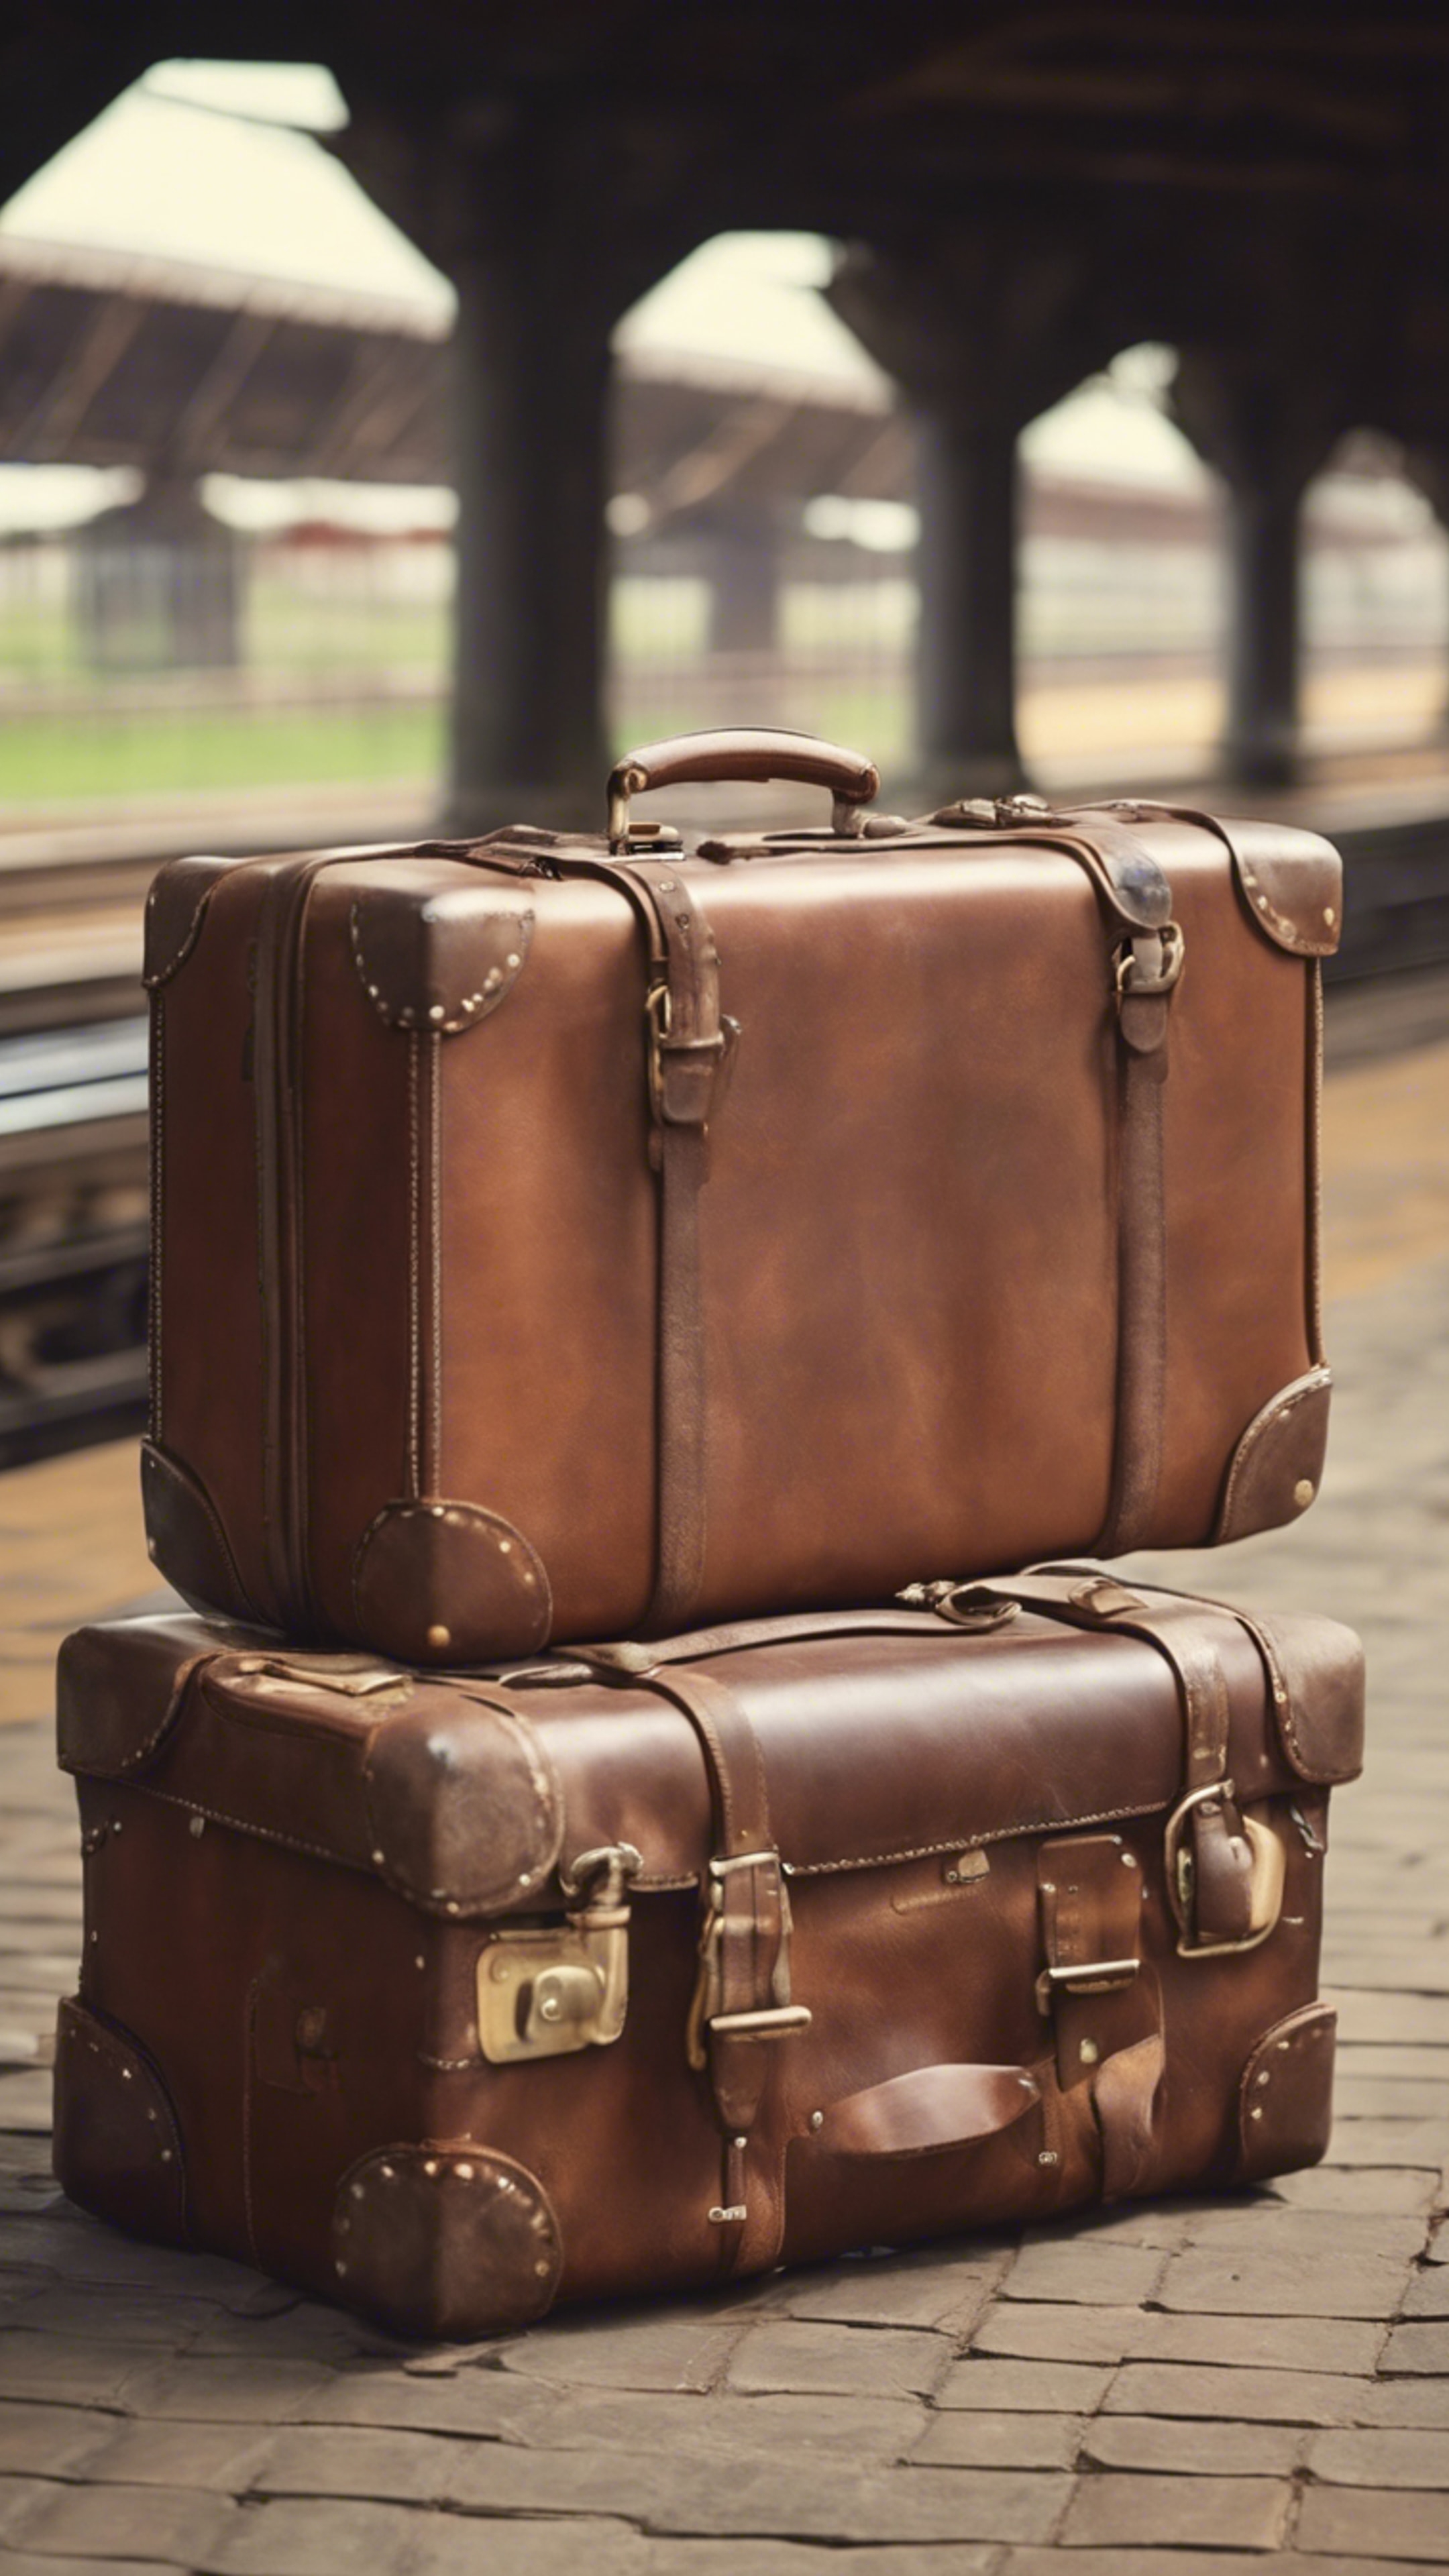 A rustic brown leather suitcase with travel tags, sitting at a quaint railway station. Kertas dinding[6b7e956de06740cdbd0e]